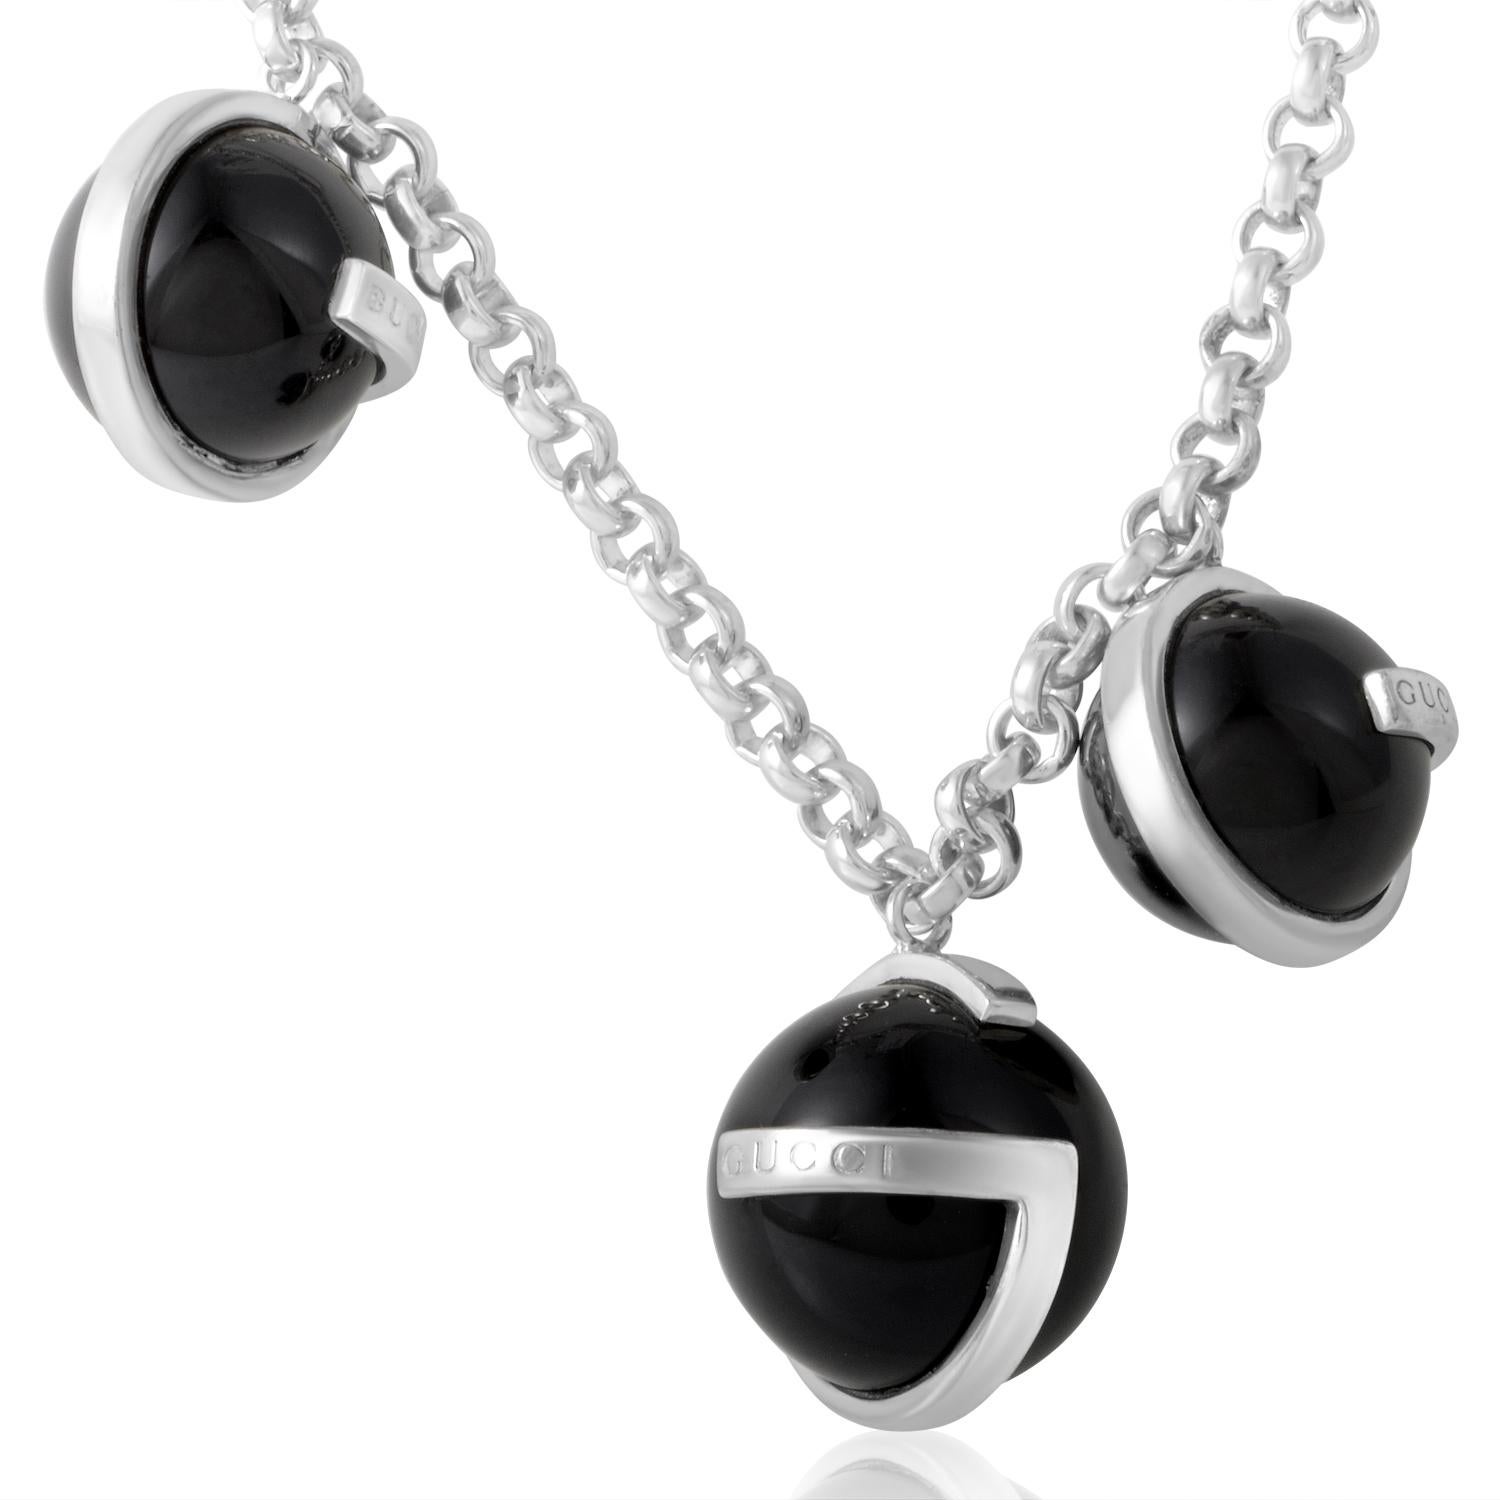 A delightful yet edgy bracelet by Gucci creates a high fashion impression. The silver rolo chain holds three onyx beads, two that measure 12mm and one that measures 14mm, in intriguing G shaped settings that are gracefully engraved with the Gucci